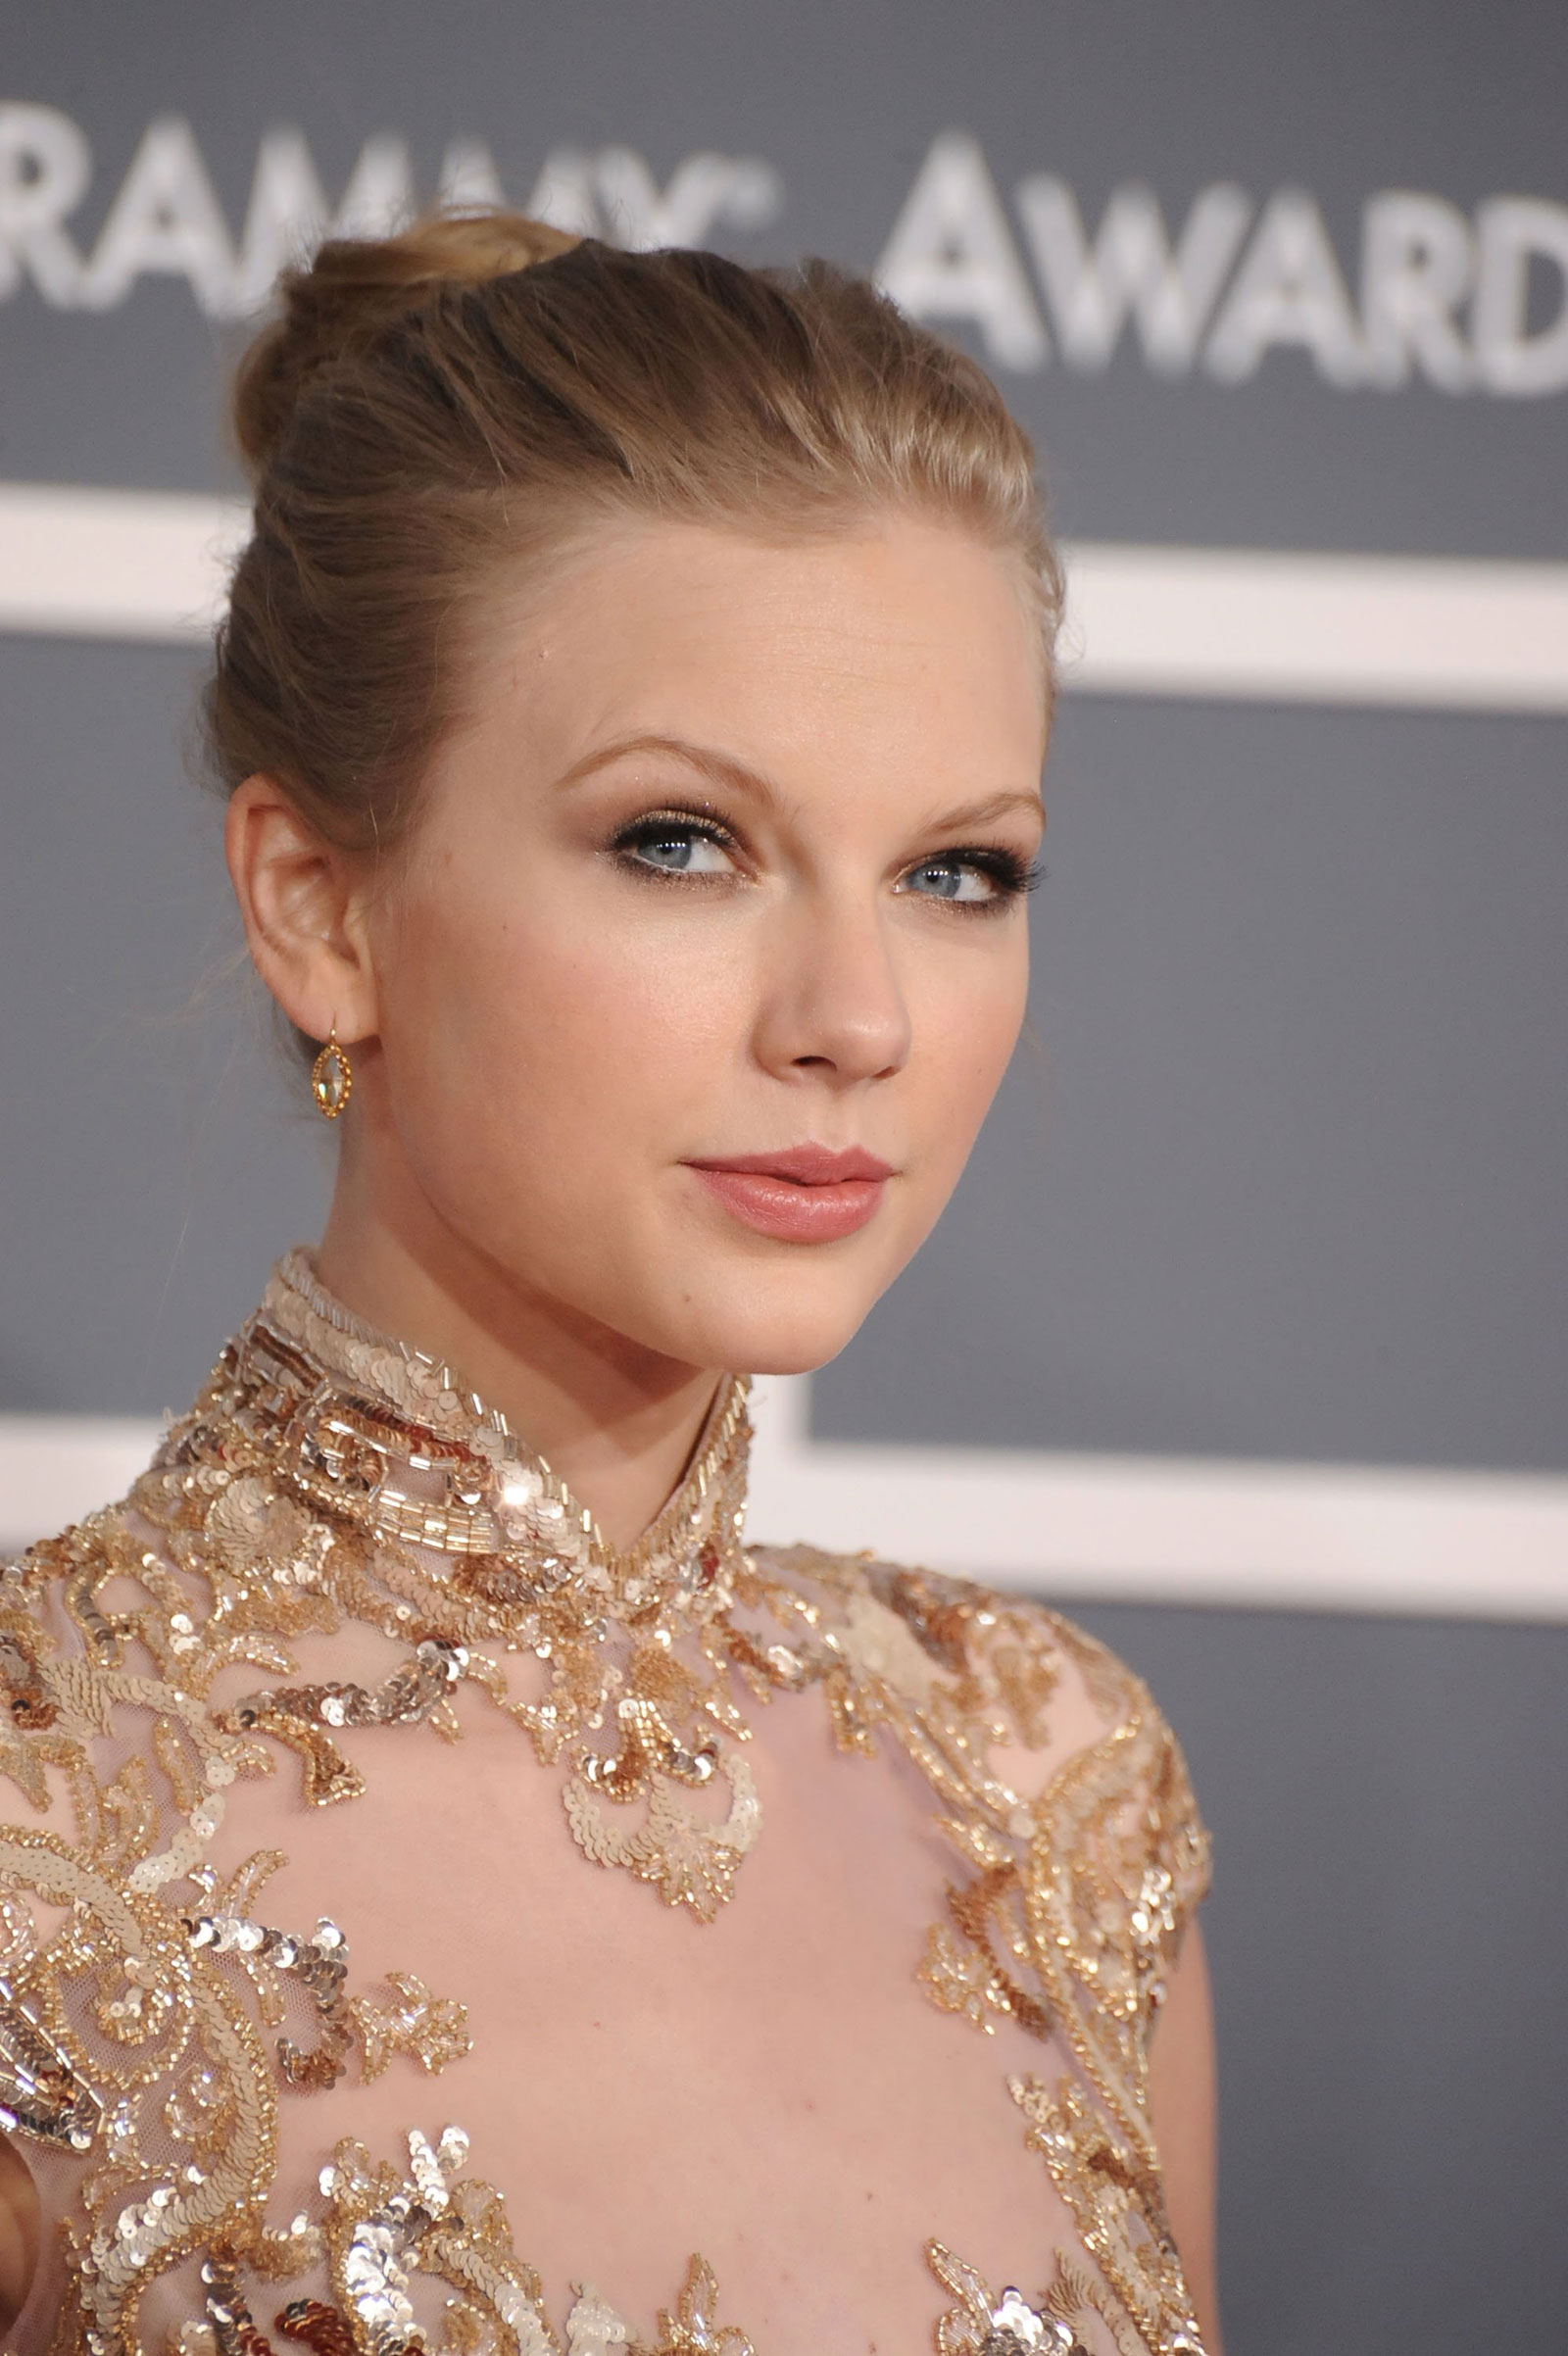 Taylor Swift wins best album at Grammys while Beyonce 